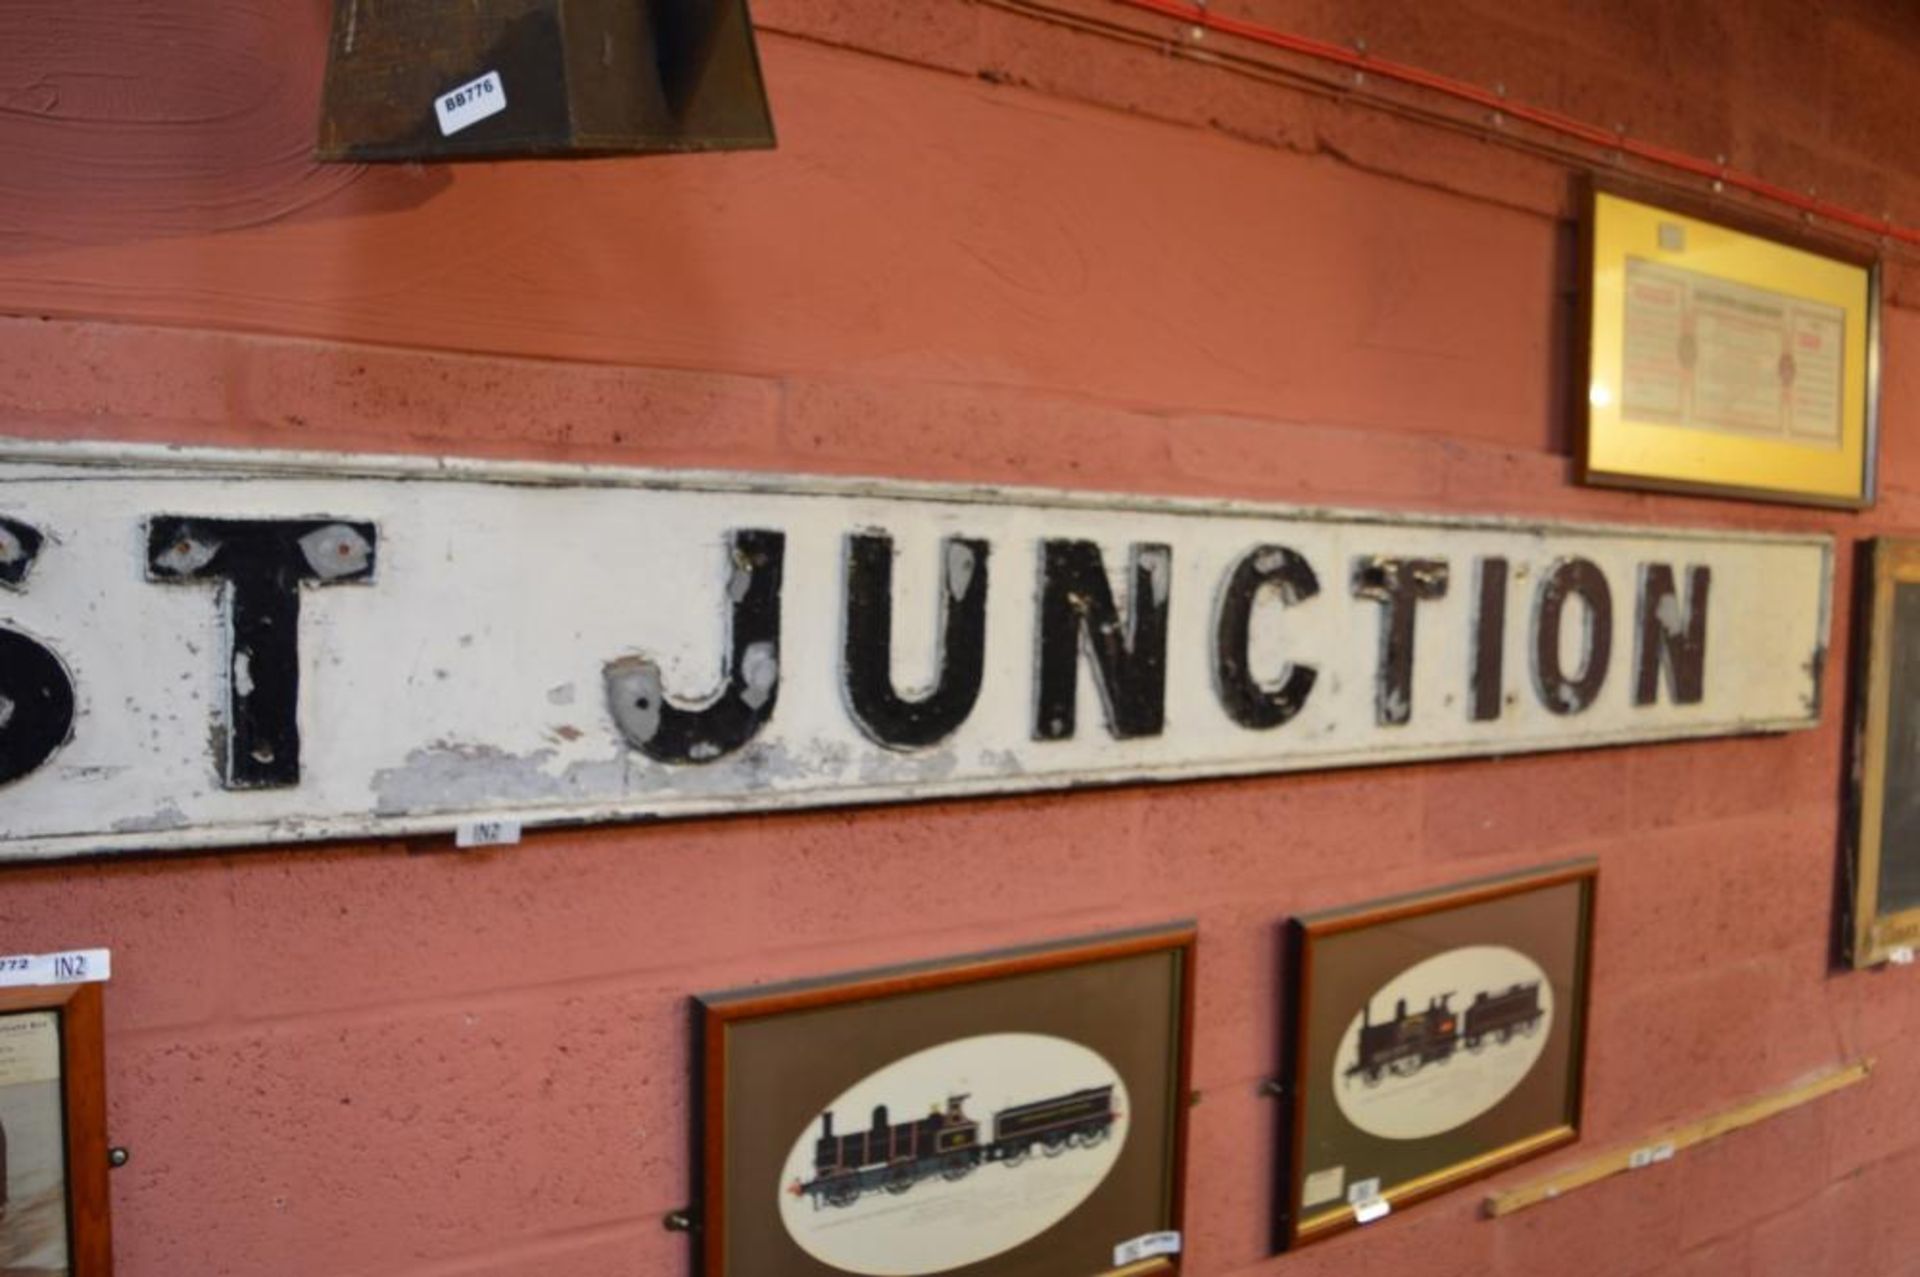 1 x East Junction Vintage Railway Signage - Wooden Back With Metal Lettering Finished in Black and W - Image 3 of 8